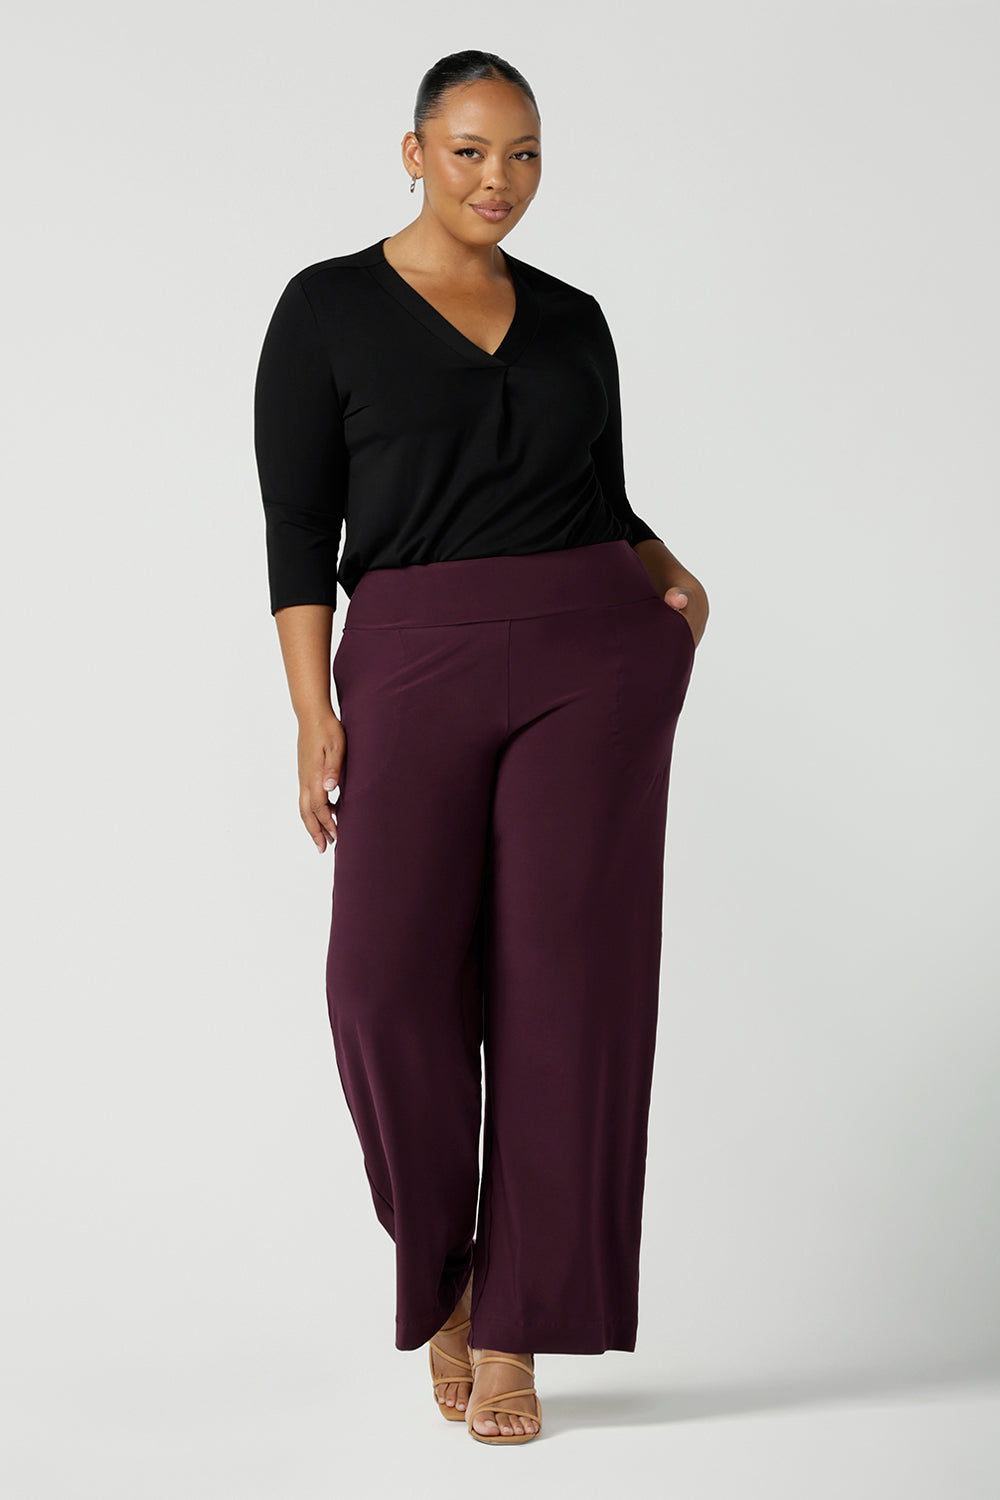 A plus size, size 18 woman wears Mulberry red, straight cut, wide leg, full-length, pull on pants by Australian and New Zealand women's clothing brand, L&F. Featuring a pull-on waistband, these stretch jersey trousers are worn with a a black long sleeve jersey top to create a comfortable outfit for work or casual wear.